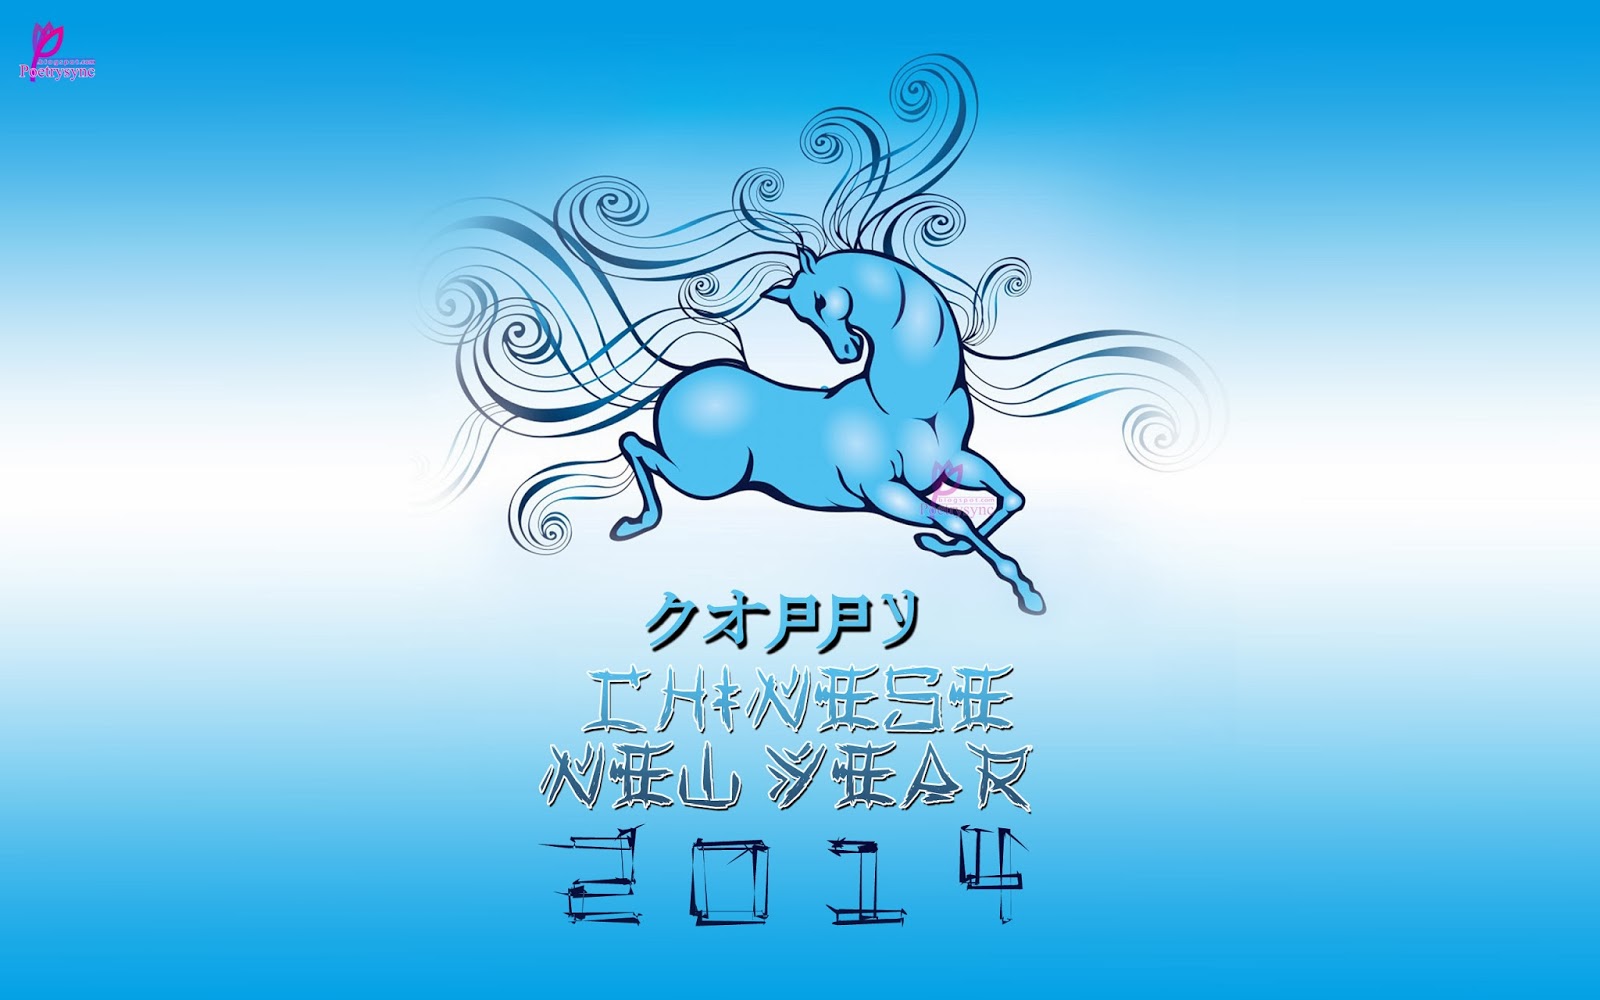 Sms Messages New Year Wishes In China Wallpaper For Background Card